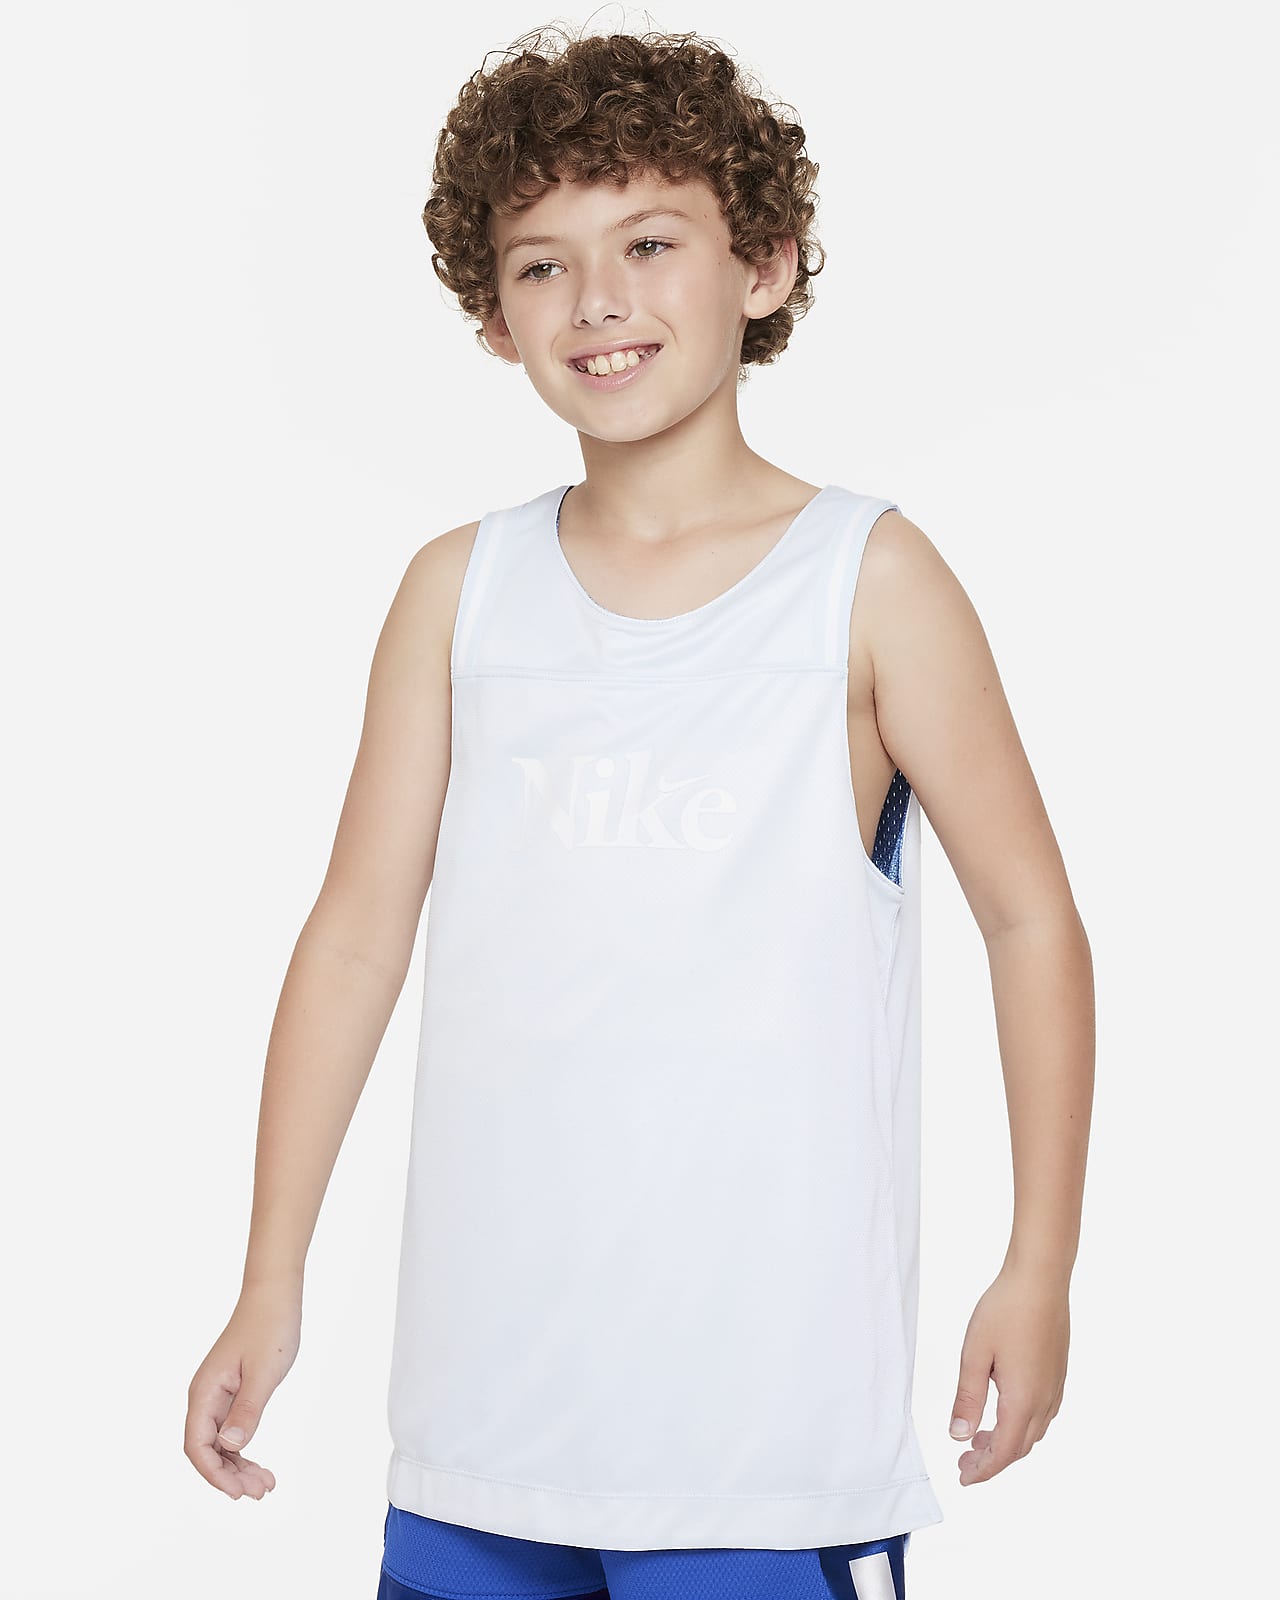 Baby Basketball Jersey and Shorts Personalized/ Kids -  Finland